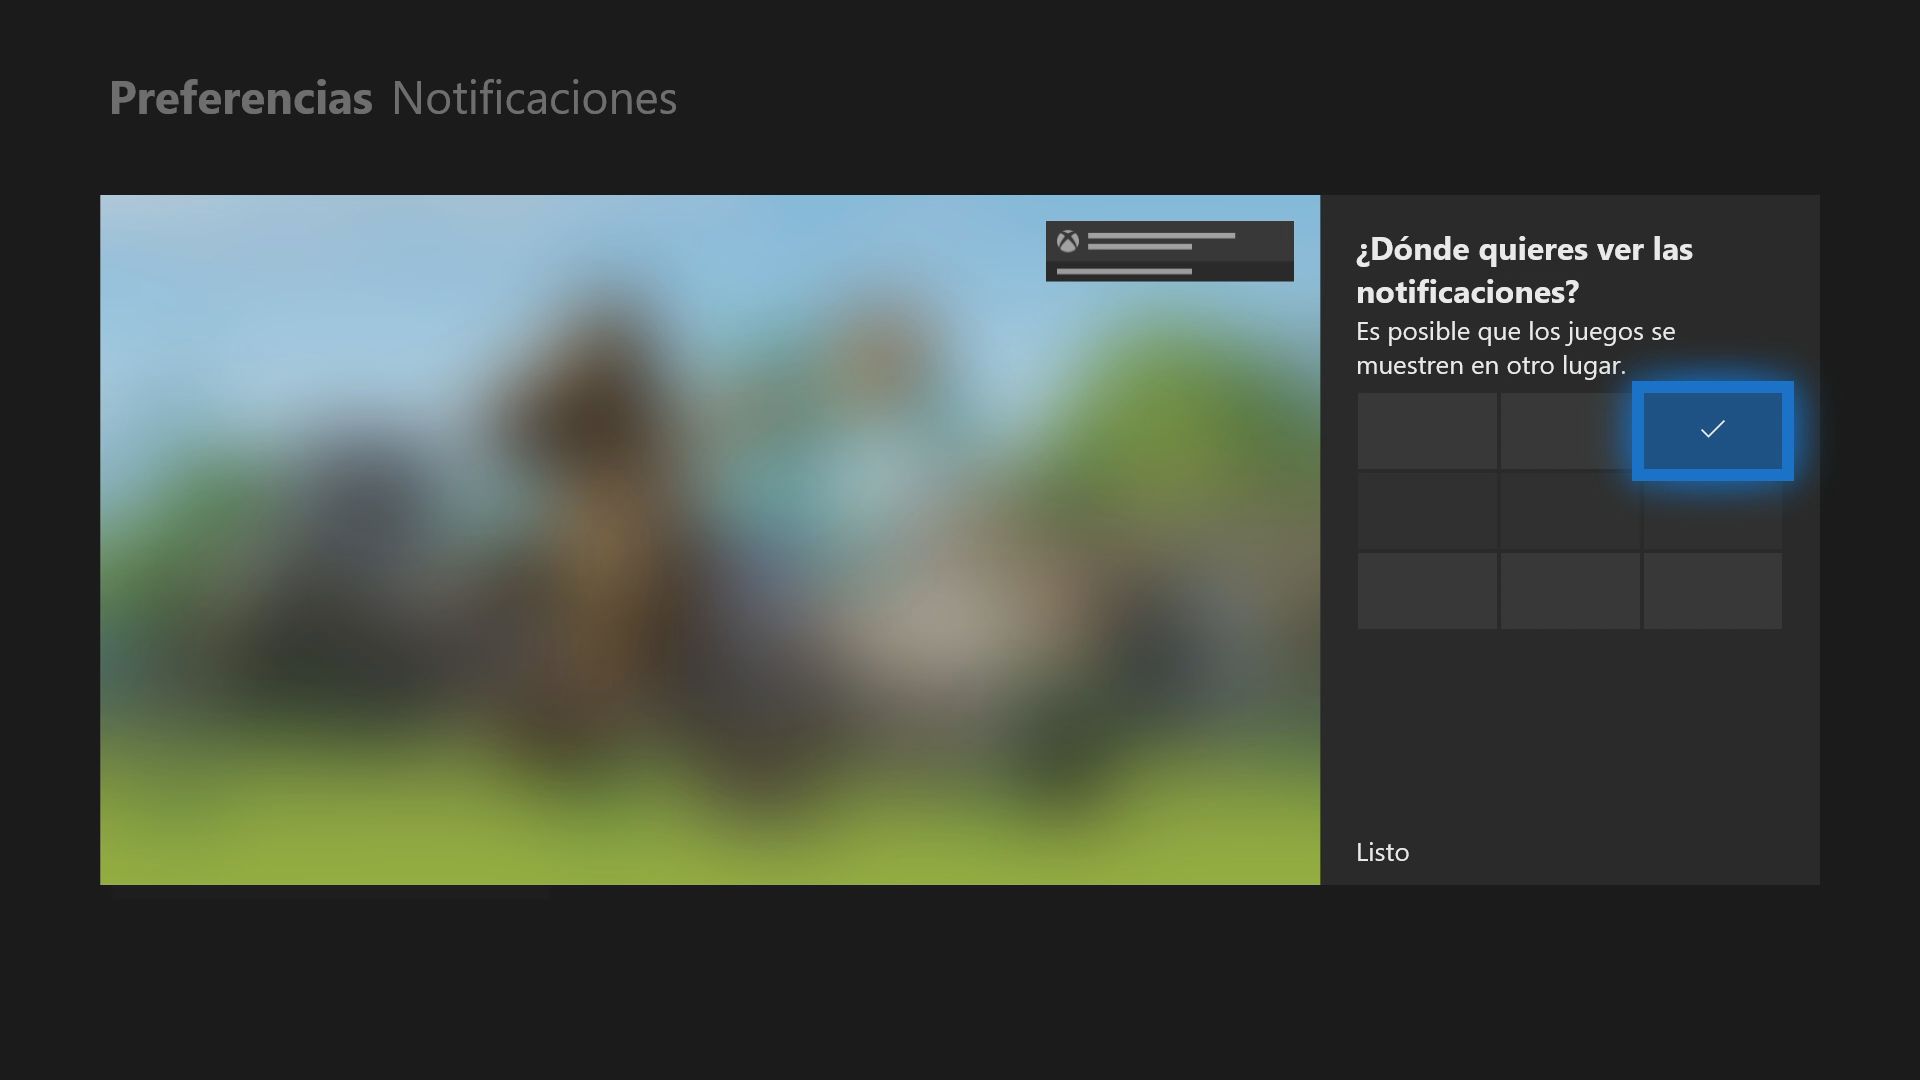 Xbox-One-Insider position-notifications "width =" 1920 "height =" 1080 "srcset =" https://generacionxbox.com/wp-content/uploads/2020/01/Position-of -the-notifications -on-Xbox-One-Insider.jpg 1920w, https://generacionxbox.com/wp-content/uploads/2020/01/Posición-de-las-notificados-en-Xbox-One-Insider- 300x169.jpg 300w , https://generacionxbox.com/wp-content/uploads/2020/01/Position-of-notifications-en-Xbox-One-Insider-1024x576.jpg 1024w, https: // generation. com / wp-content / upload / 2020/01 / Notification-on-Xbox-One-Insider-768x432.jpg 768w, https://generacionxbox.com/wp-content/uploads/2020/01/ Position-of -notifications-in-Xbox-One-Insider-1536x864.jpg 1536w "size =" (max-wide: 1920px) 100vw, 1920px "title =" The February 2020 update of the Xbox One is now available to everyone